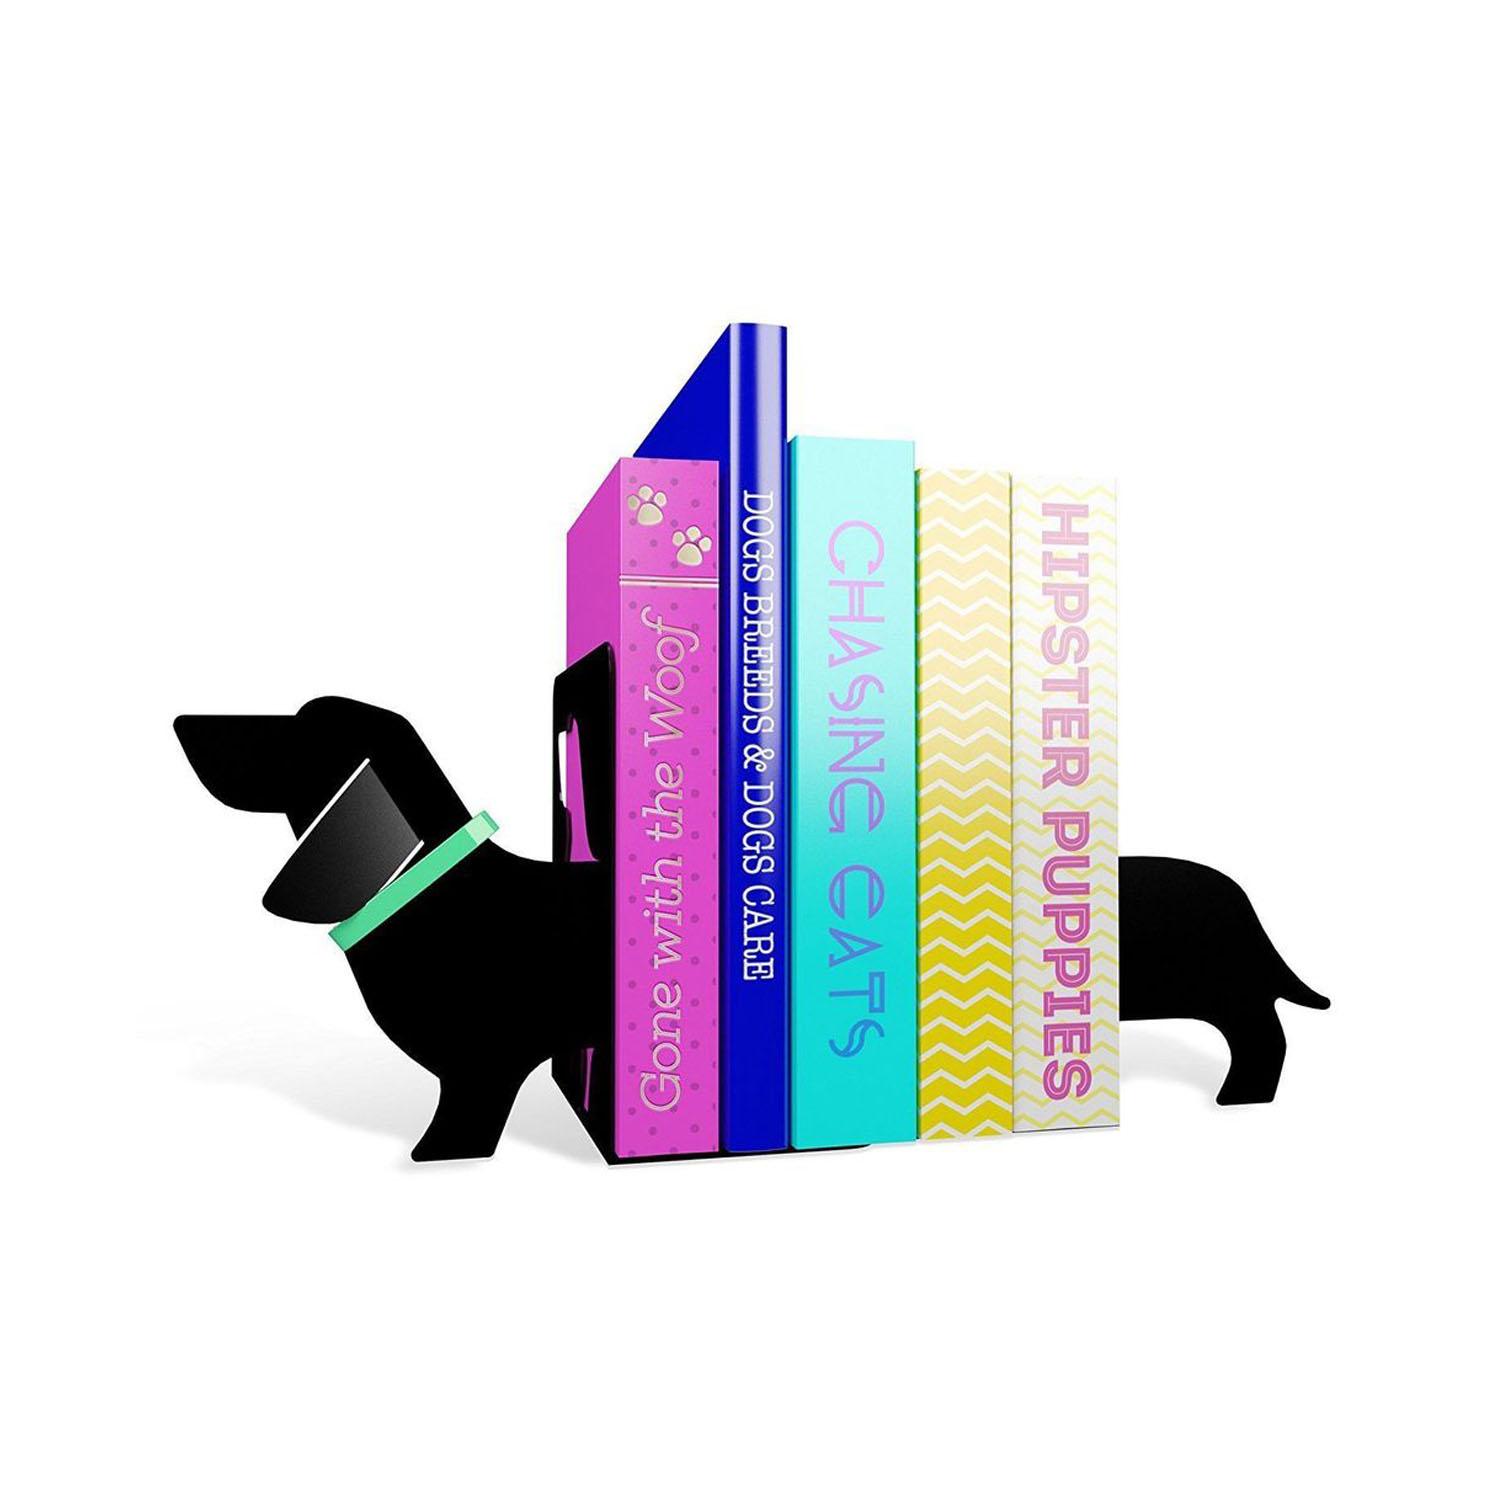 REALLY LONG SAUSAGE DOG BOOKENDS DOG SHAPED BOOKENDS 